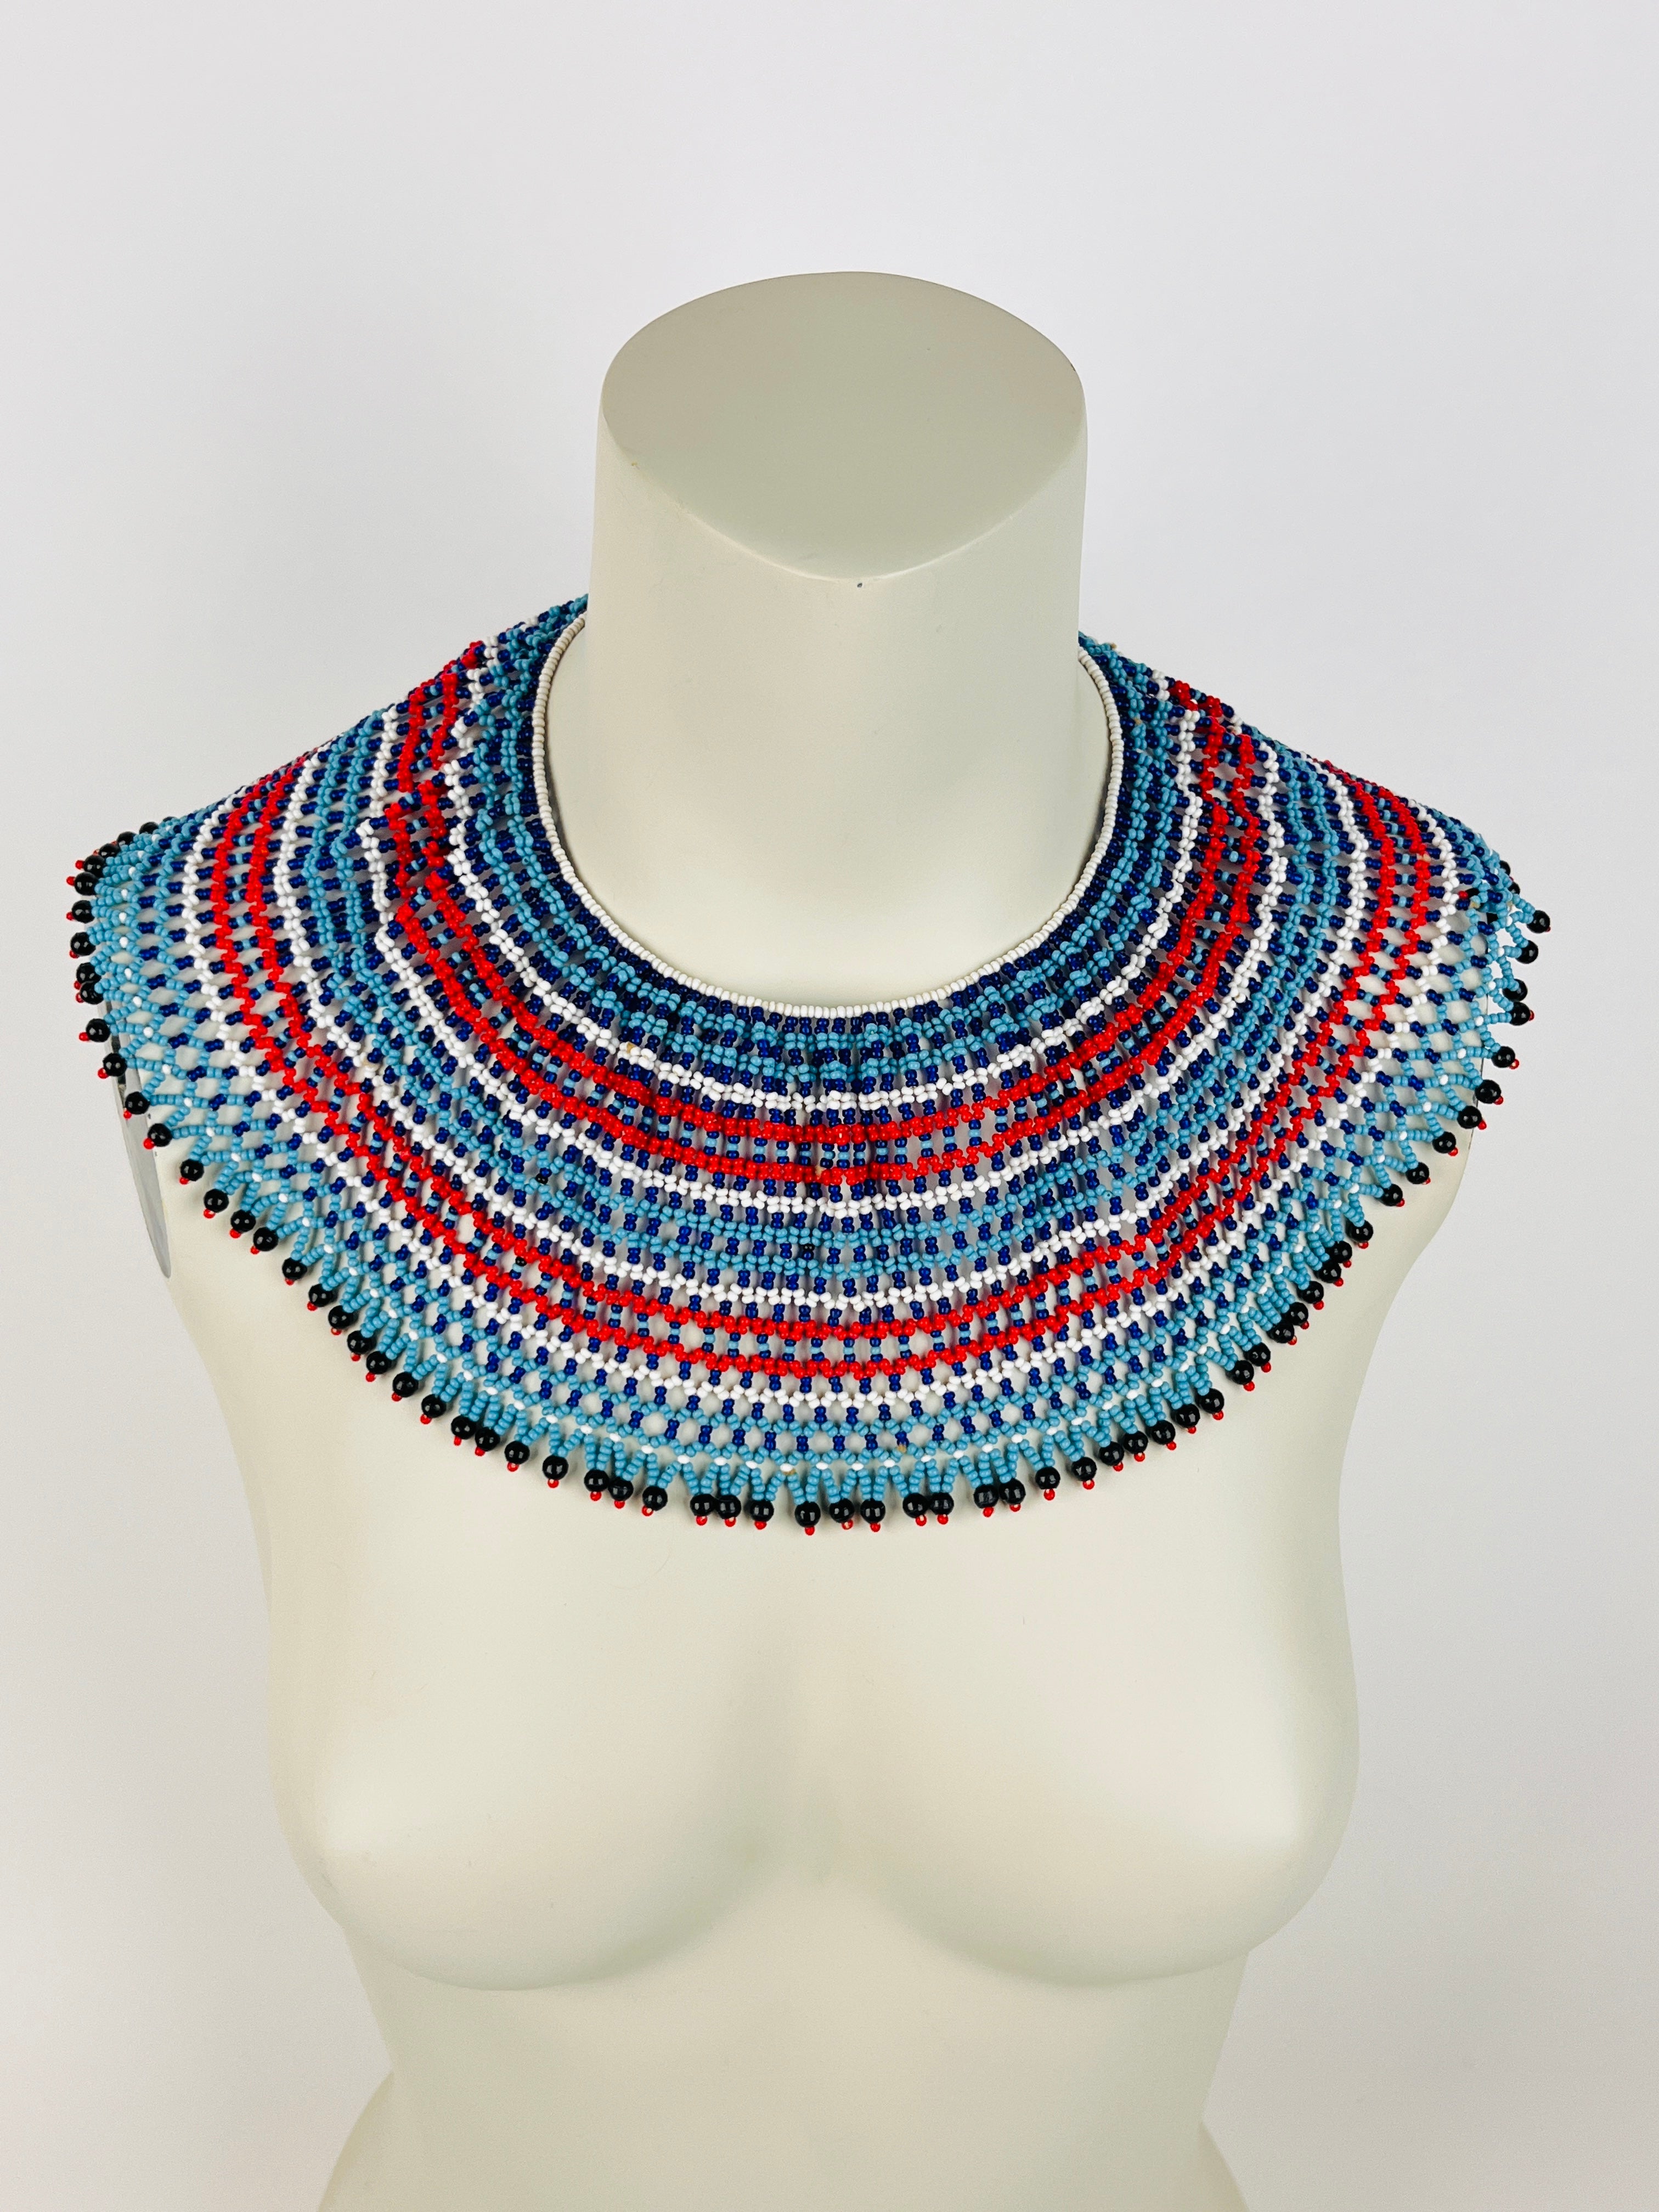 Beaded collar necklace in ethnic style made with terracotta red and black  seed beads casual everyday jewelry for women